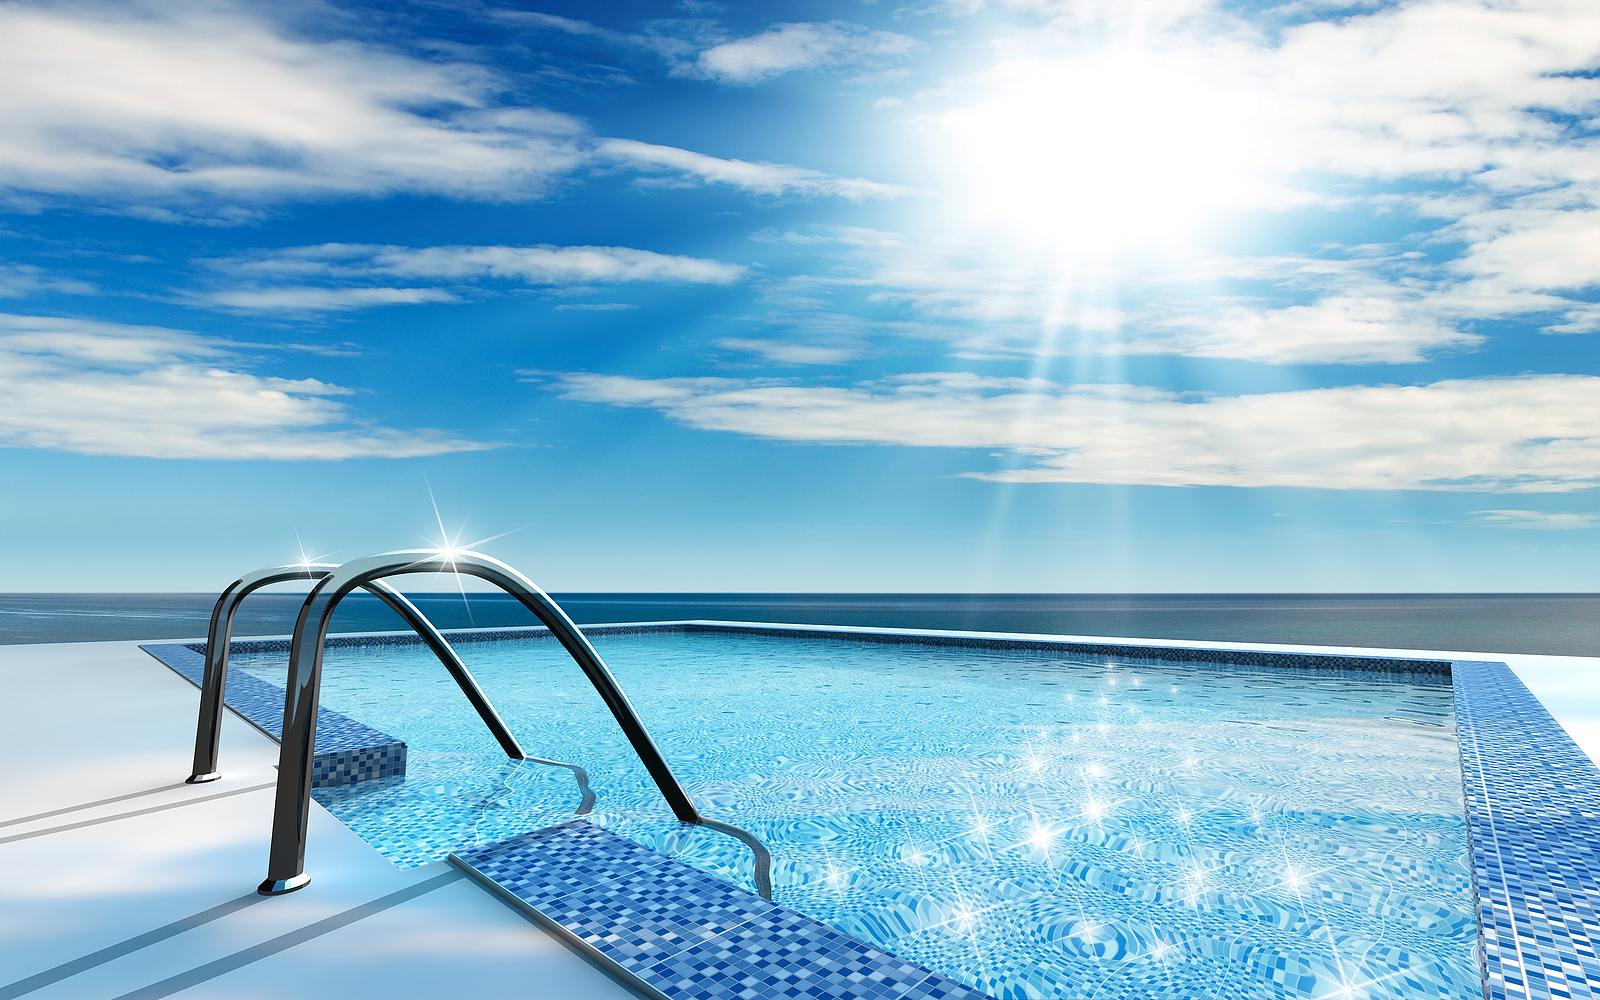 How Difficult Is It to Maintain a Swimming Pool? | Select Pool Services